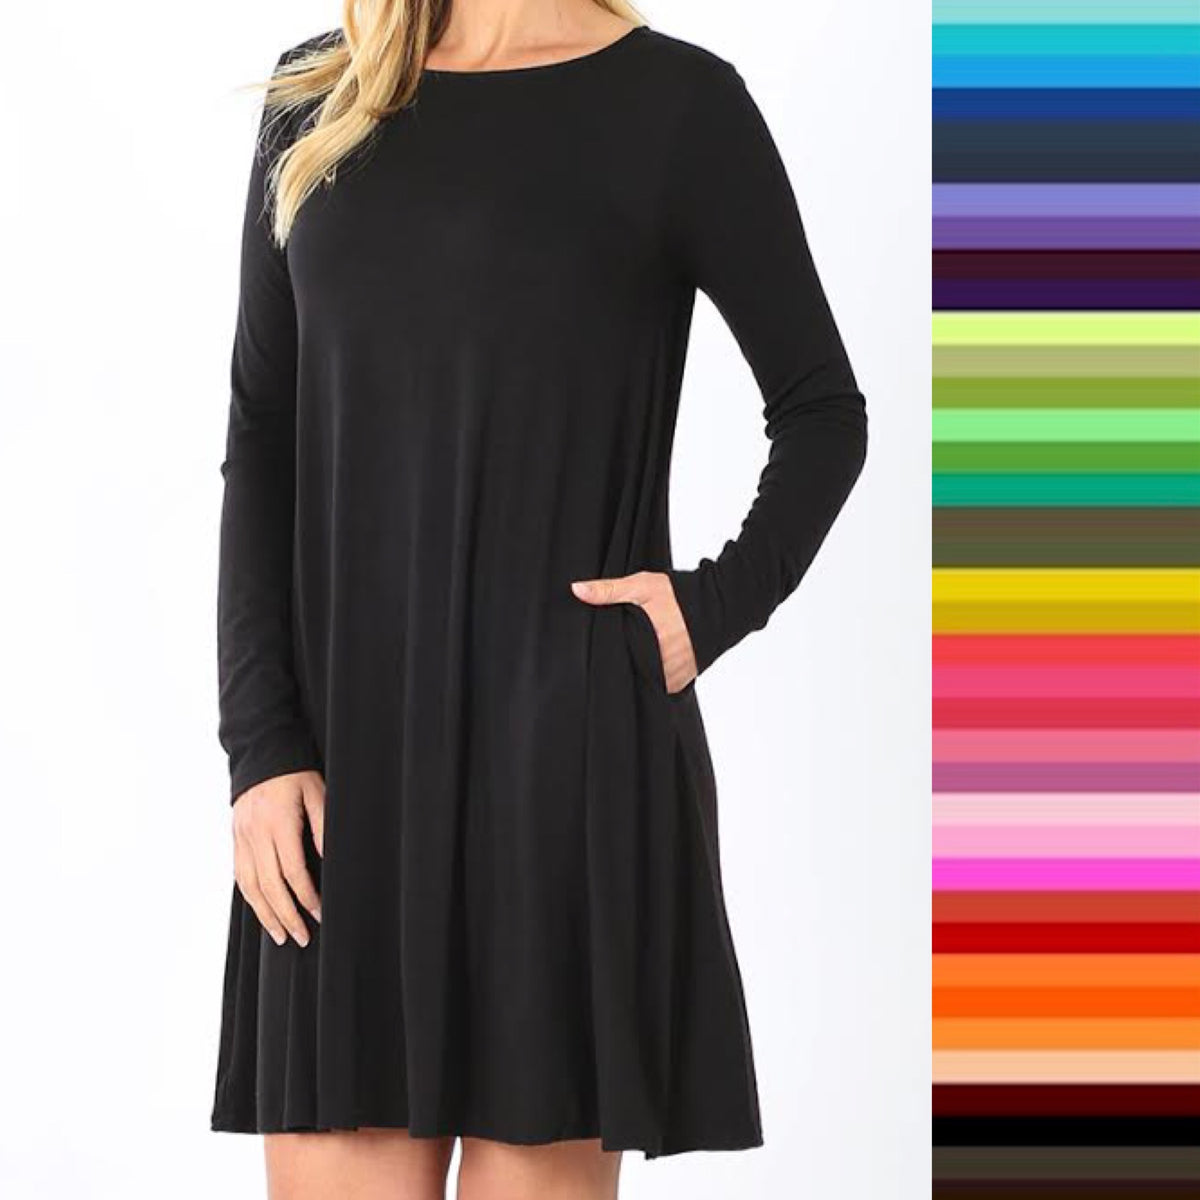 Lety Long Sleeve A-Line Womens Dress with Pockets and Rounded Scoop Neckline and Straight Hem available in 10 colors